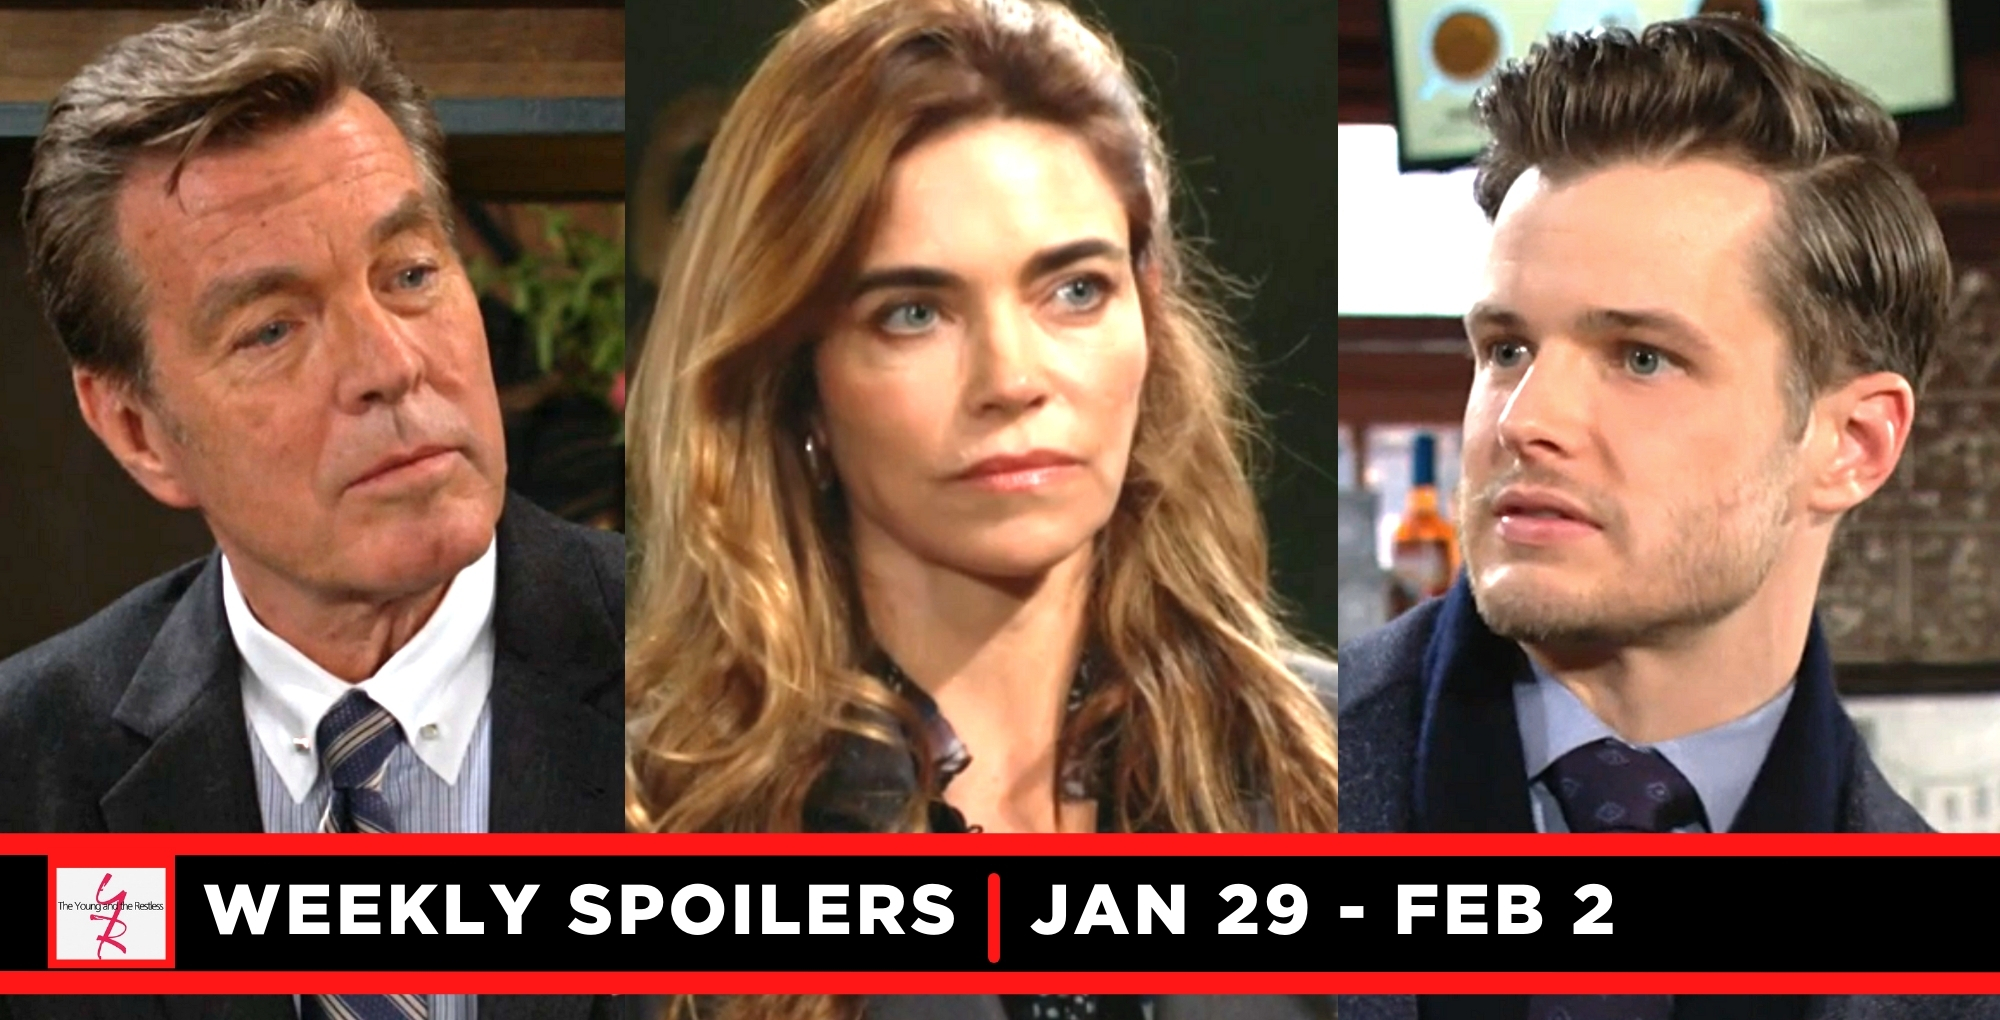 young and the restless spoilers for the week of january 29- february 2, jack, victoria, kyle